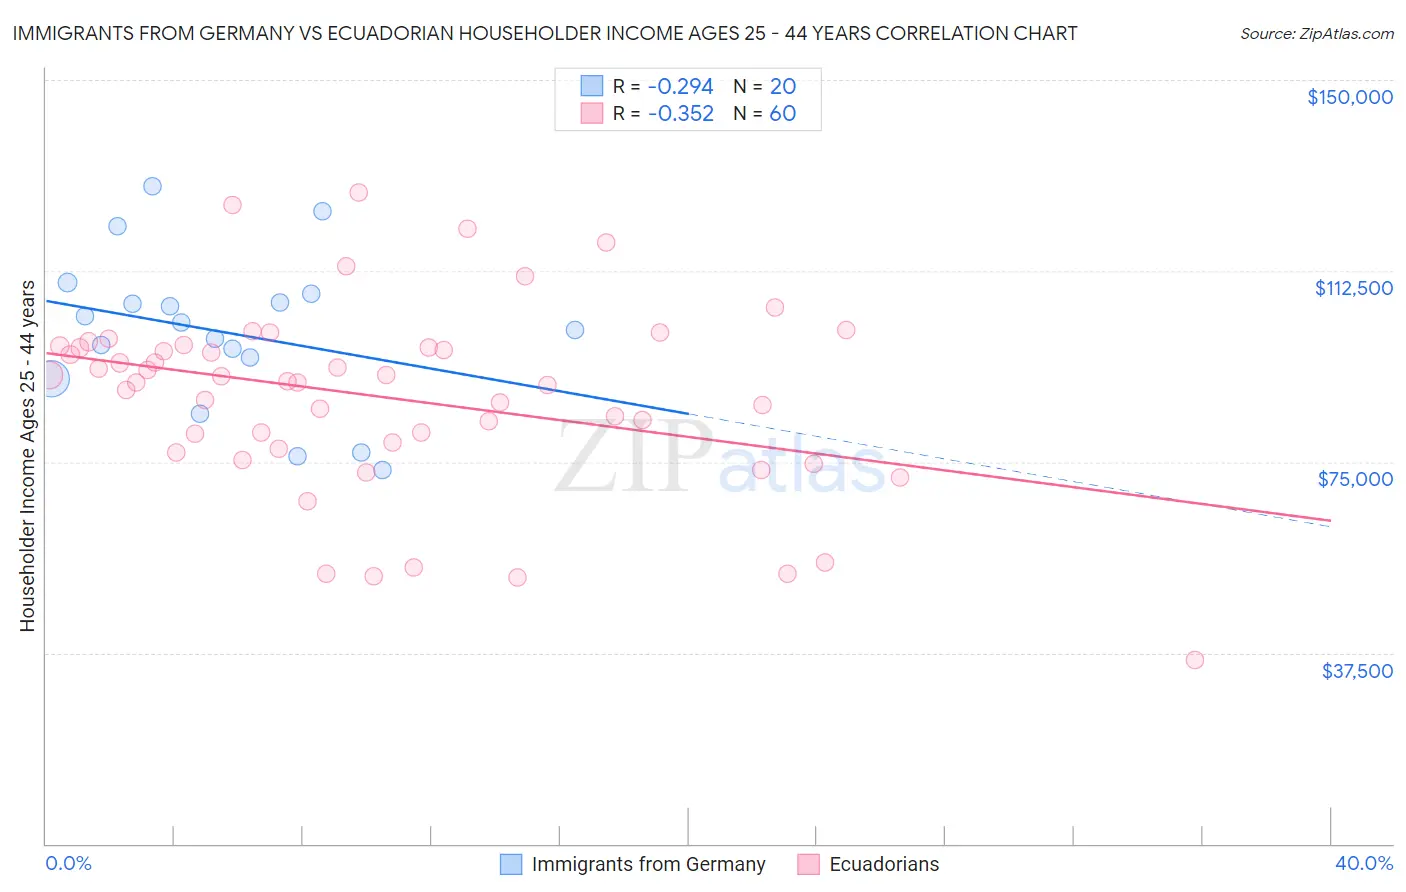 Immigrants from Germany vs Ecuadorian Householder Income Ages 25 - 44 years